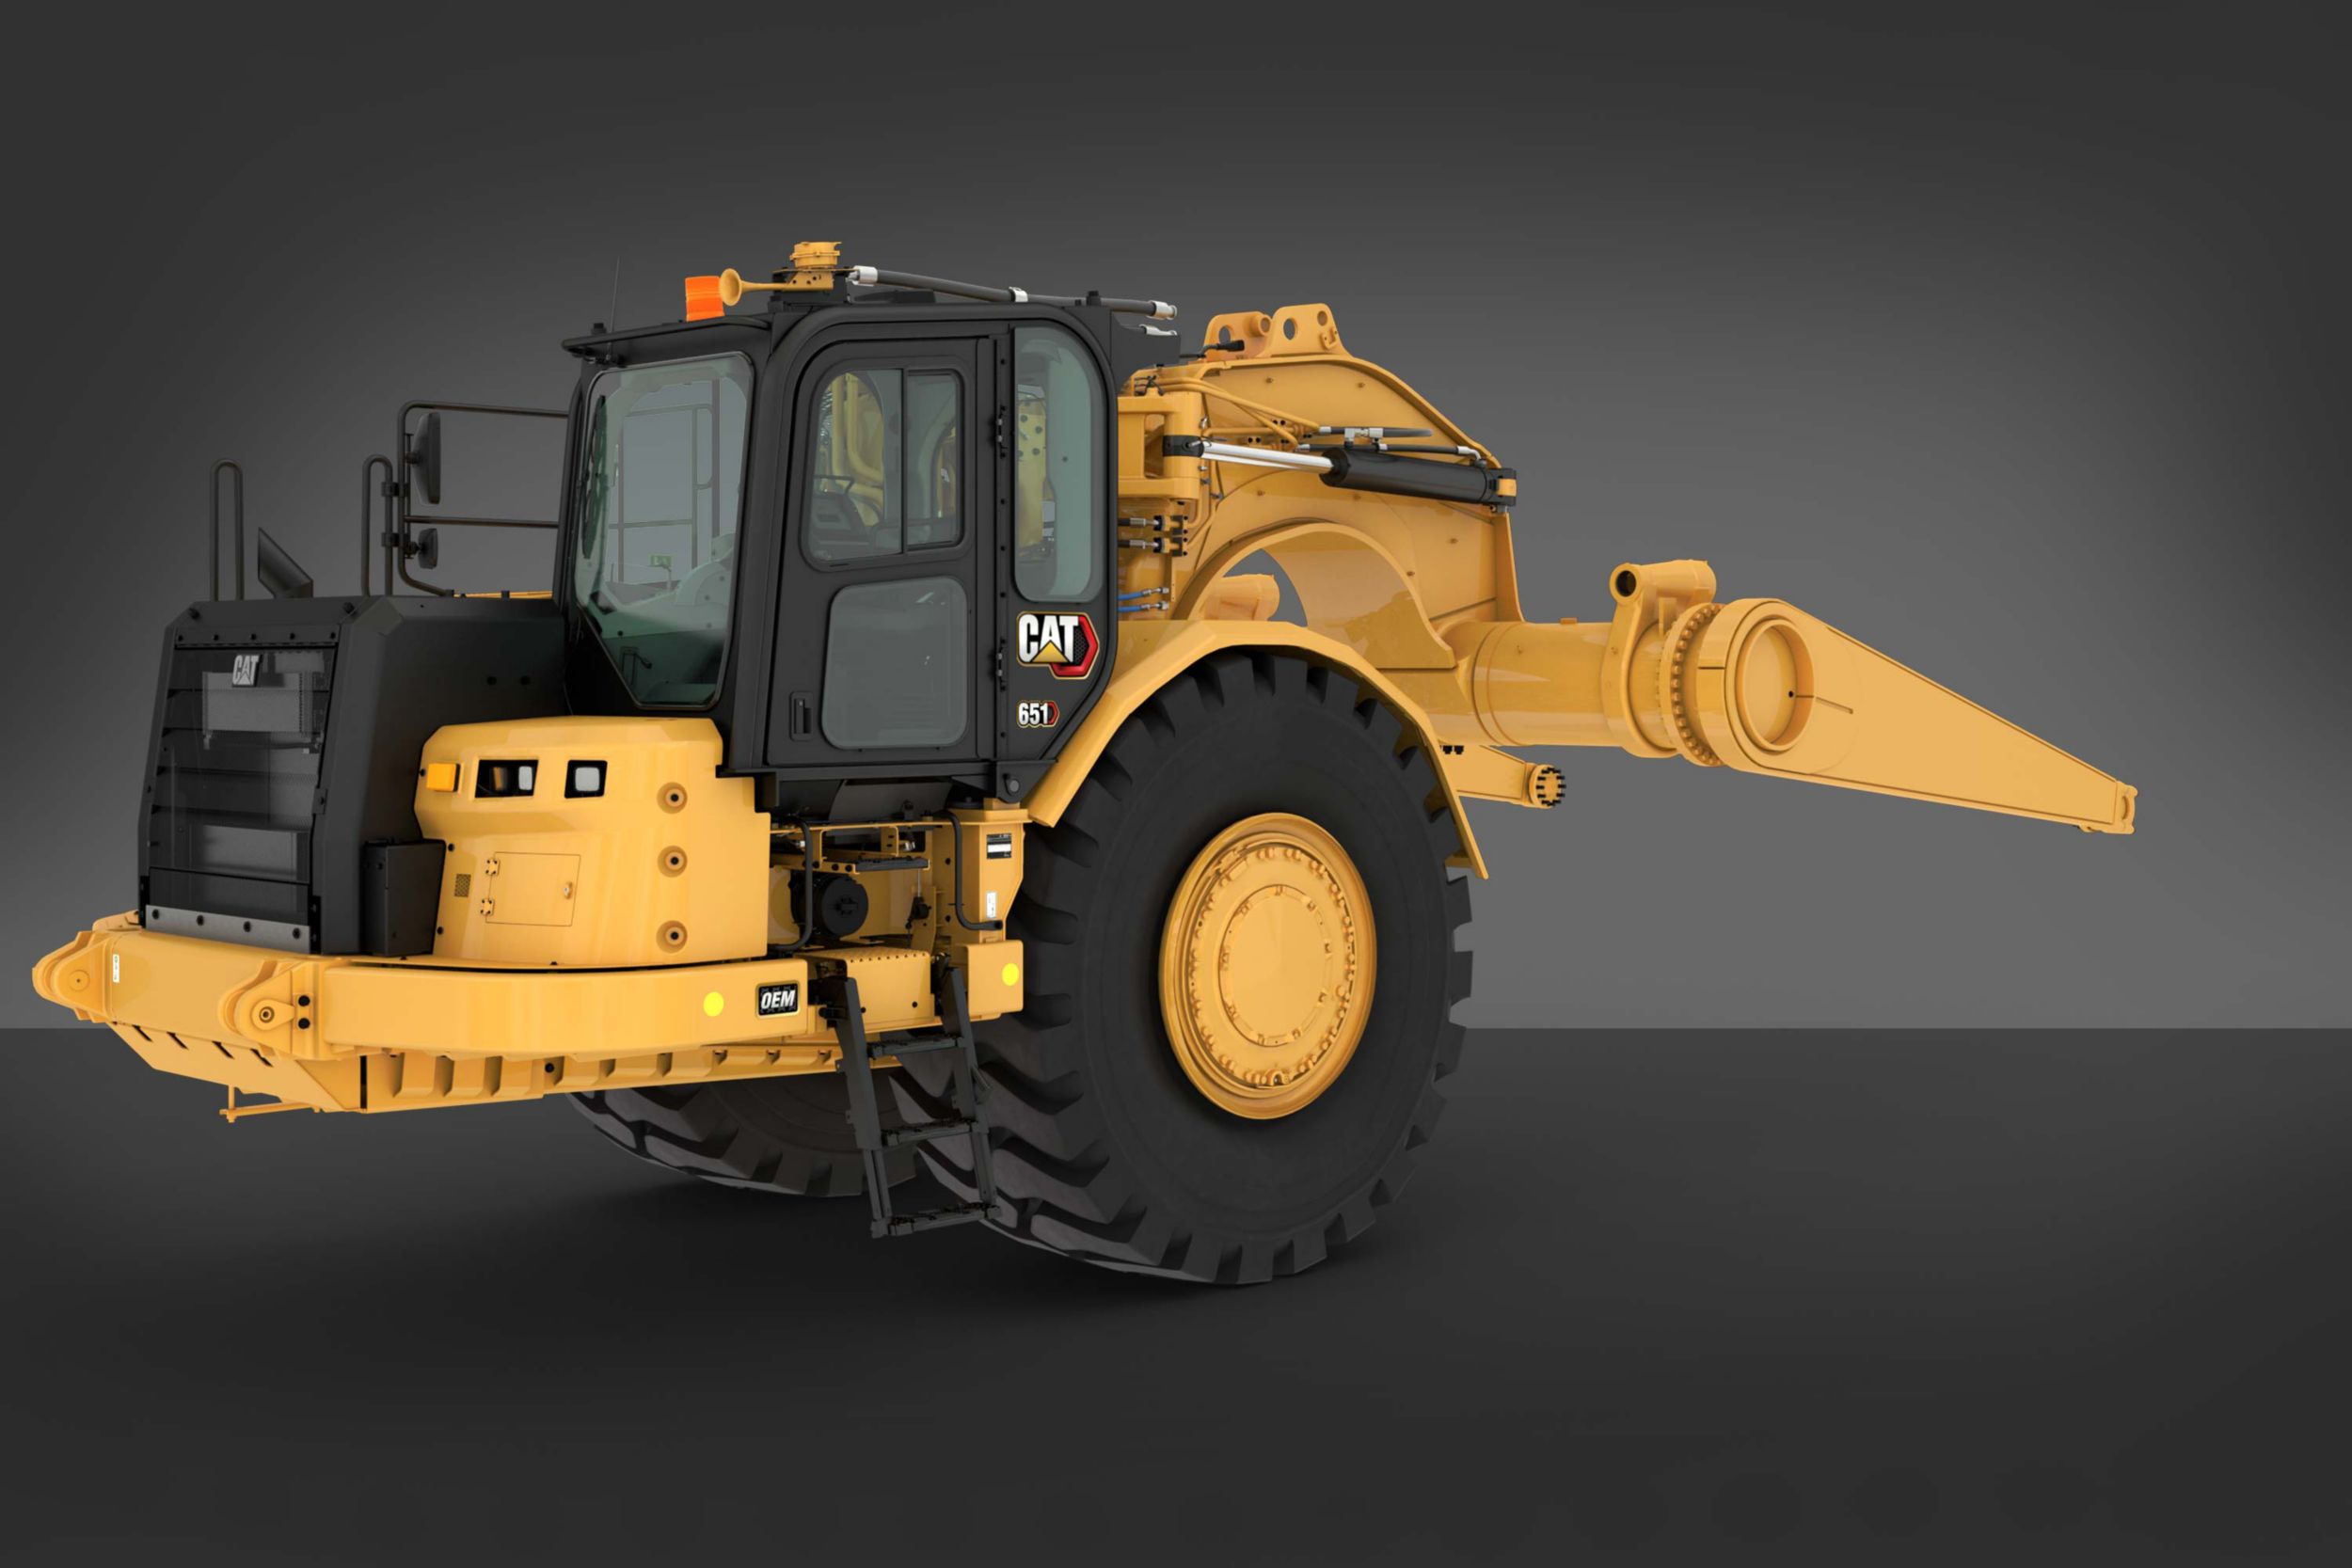 Customize your Cat 651 partial wheel tractor scaper.